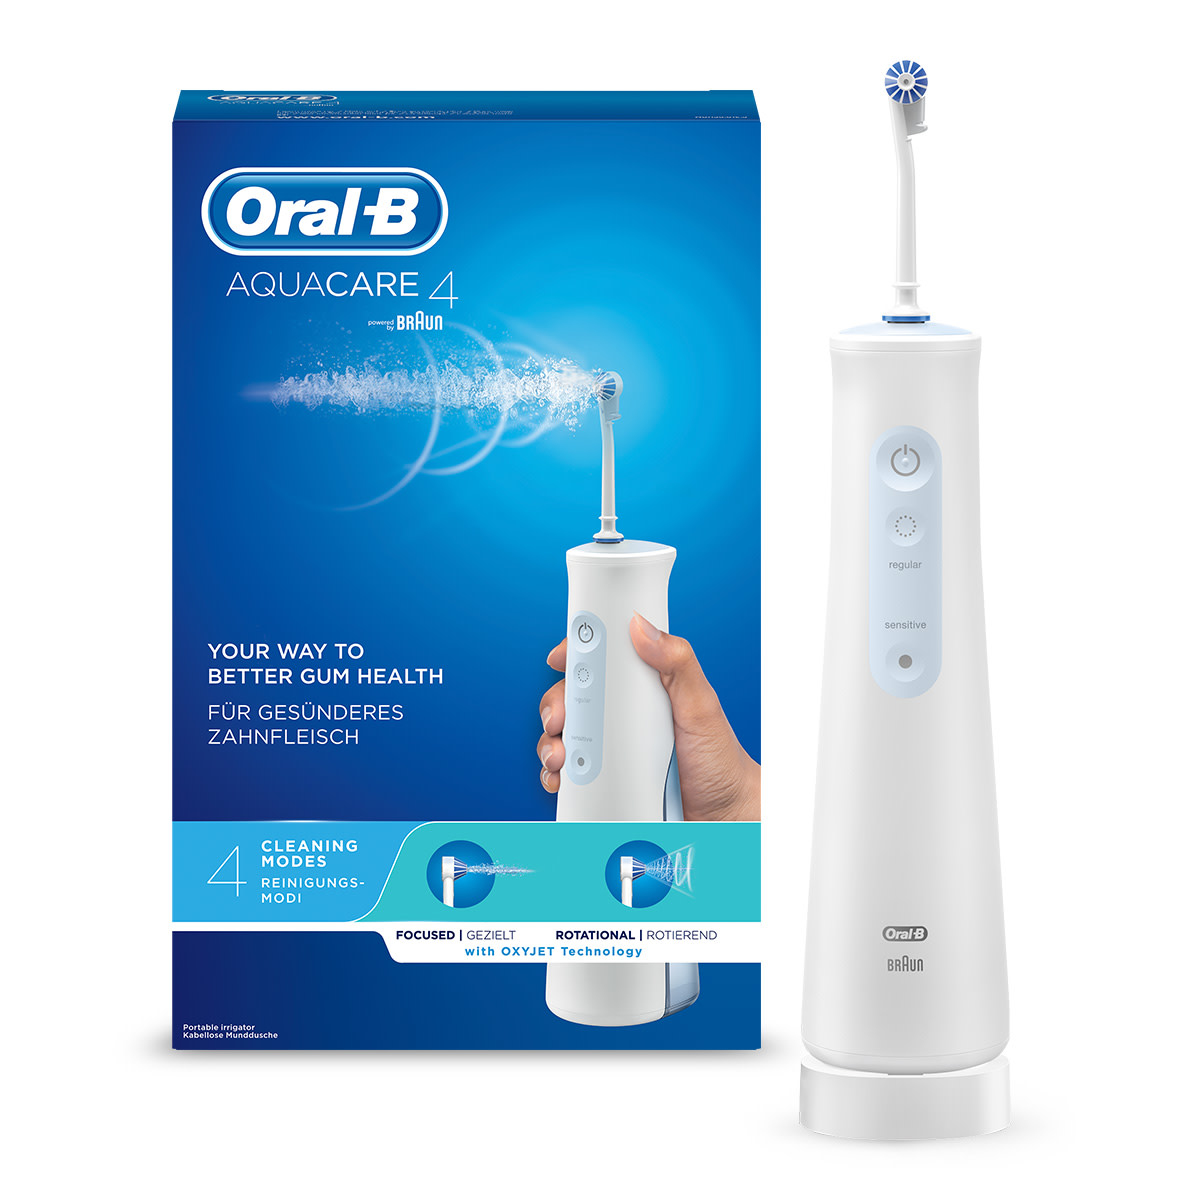 Oral-B AquaCare 4 oral irrigator, interdental cleaner with 4 cleaning modes for gentle dental care and healthy gums, Designed by Braun, white/blue White Single